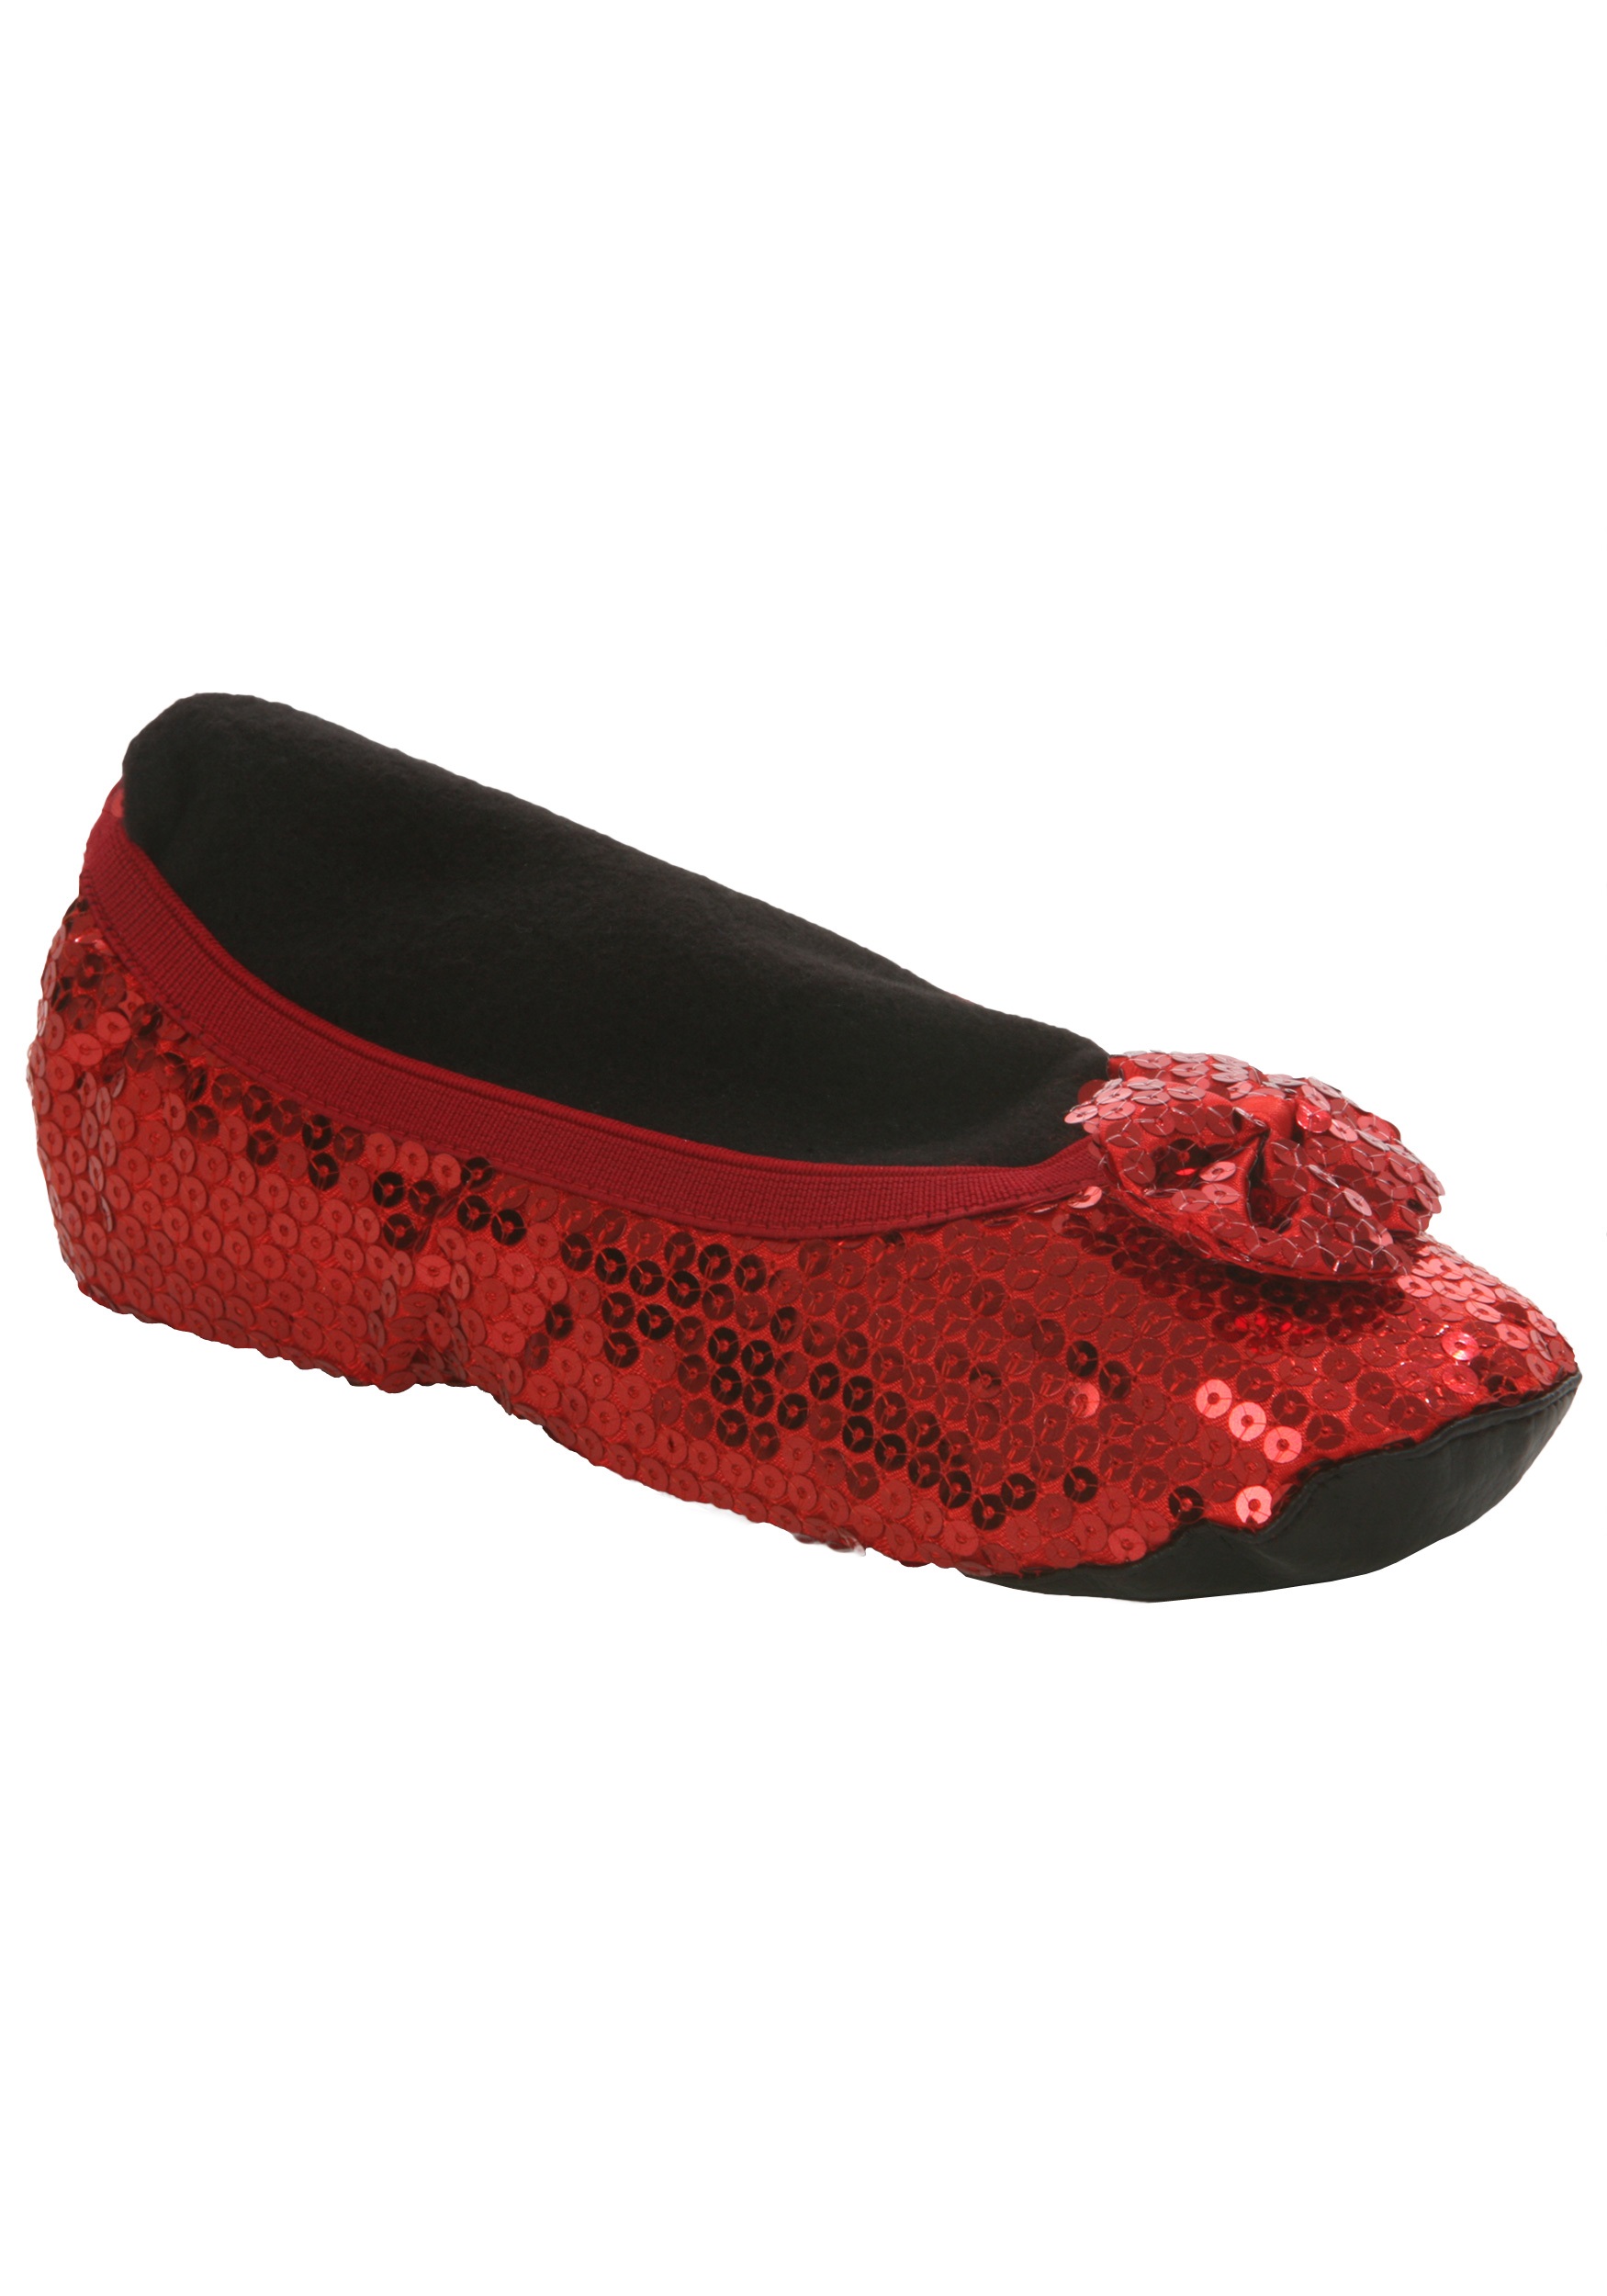 Adult Red Slippers - Halloween Costumes